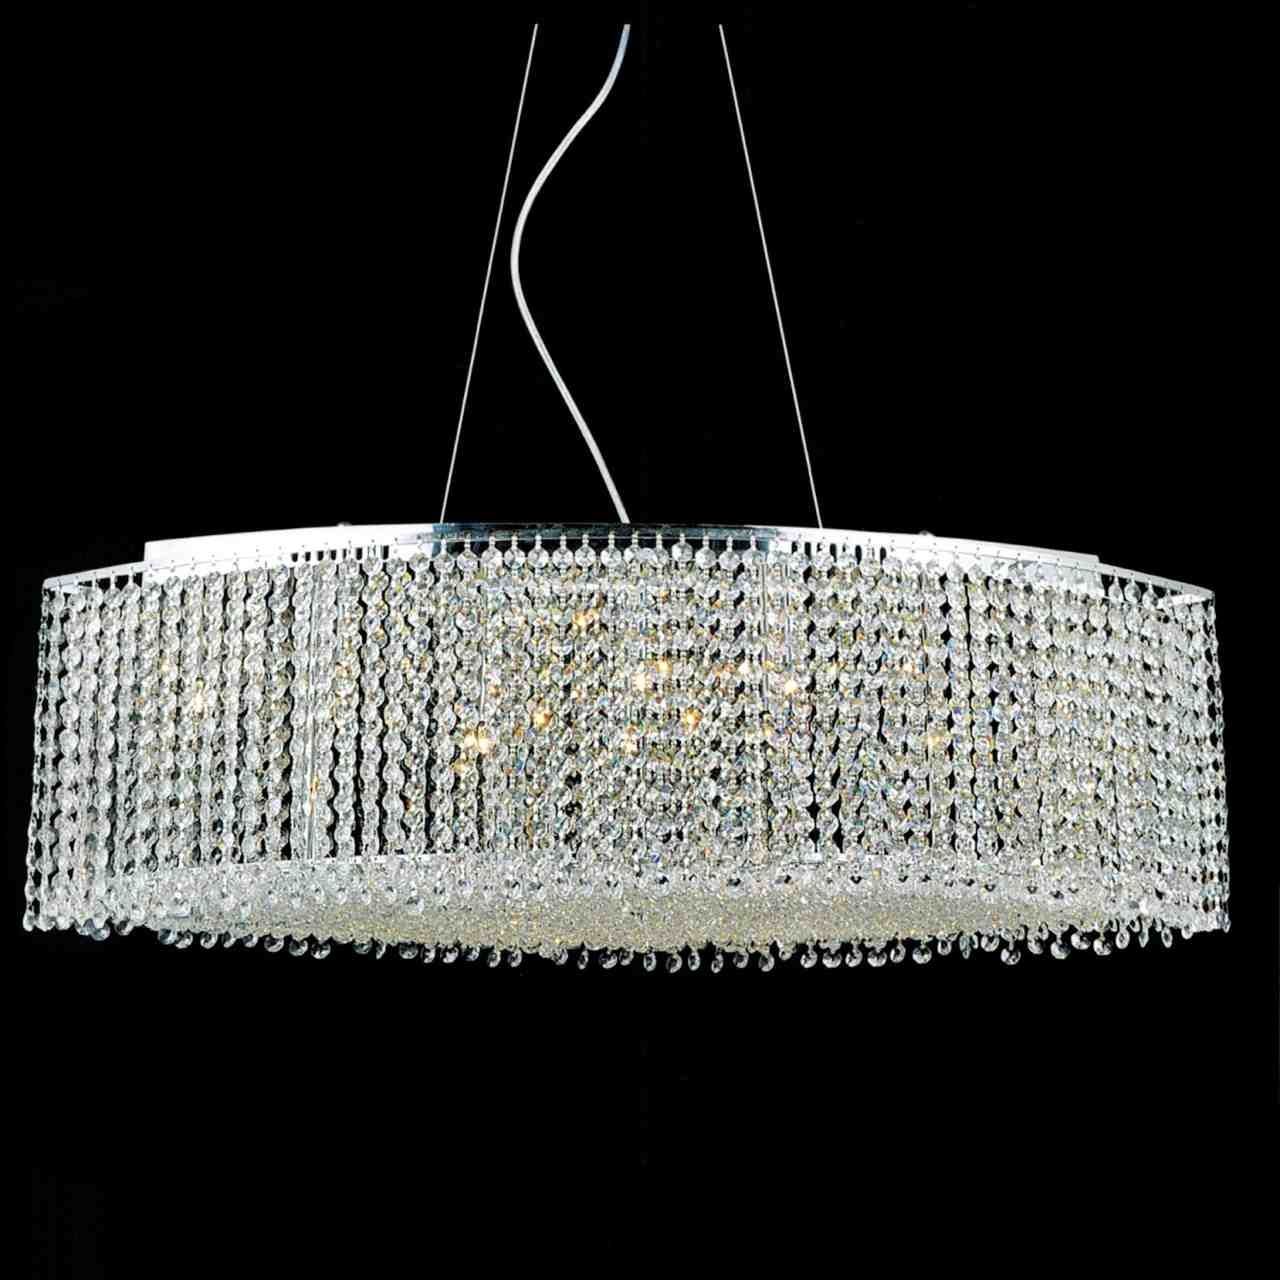 Brizzo Lighting Stores 35 Rainbow Modern Linear Crystal Inside Crystal And Chrome Chandeliers (View 5 of 12)